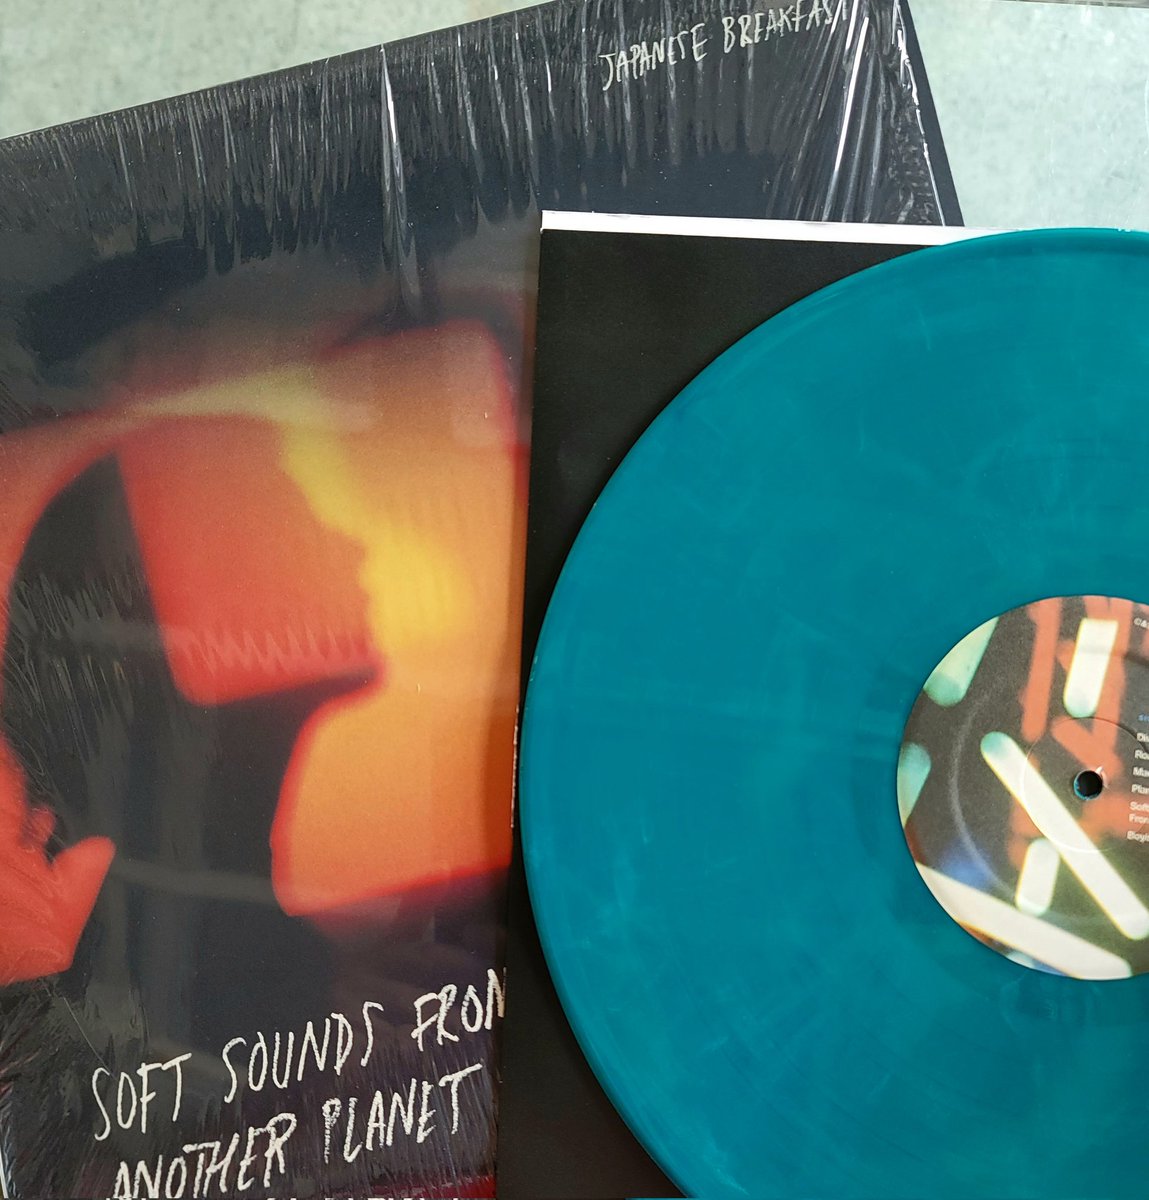 Wow! Out of print 2017 @Jbrekkie 'Soft Sounds From Another Planet' on turquoise vinyl! You don't ever see this one. 
.
.
#japanesebreakfast #softsoundsfromanotherplanet #rarevariant